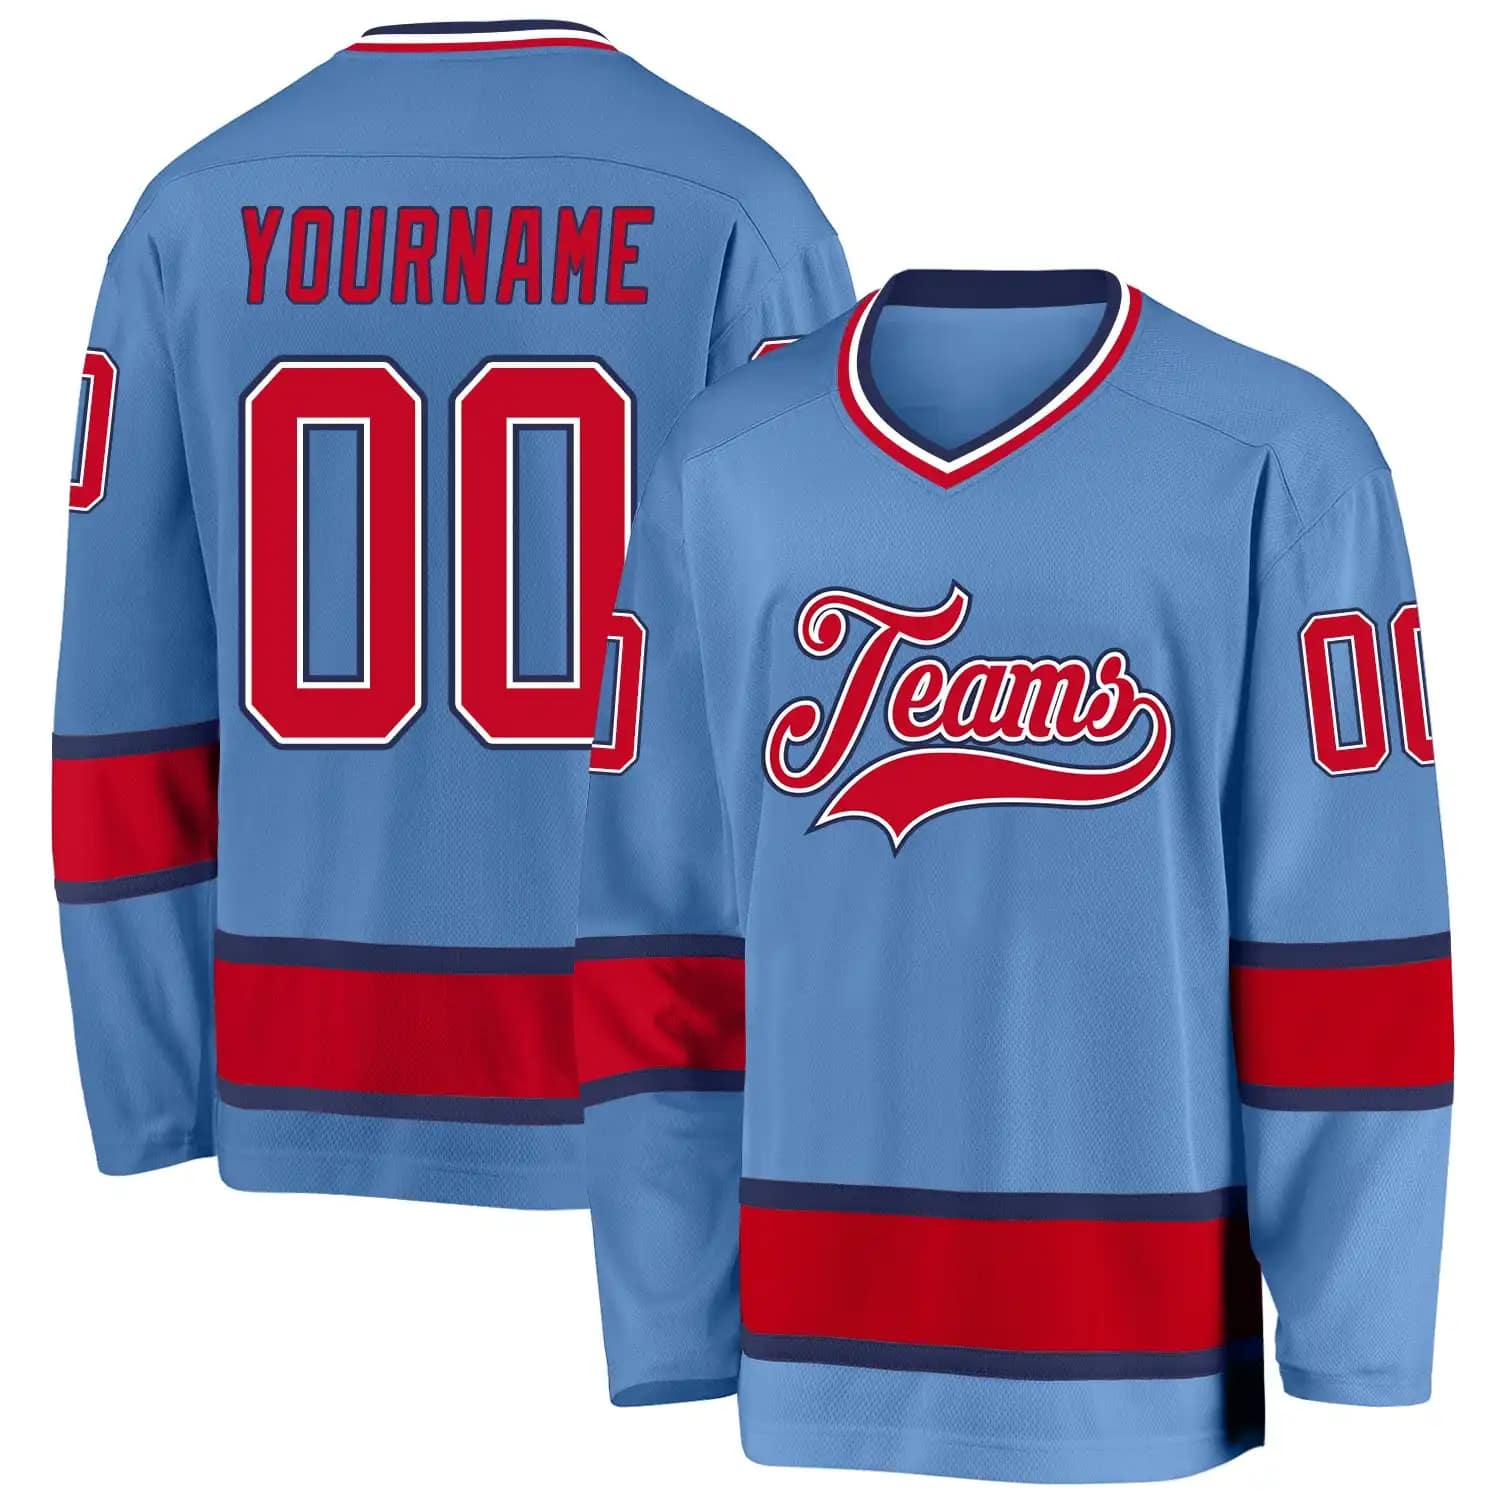 Stitched And Print Light Blue Red-navy Hockey Jersey Custom